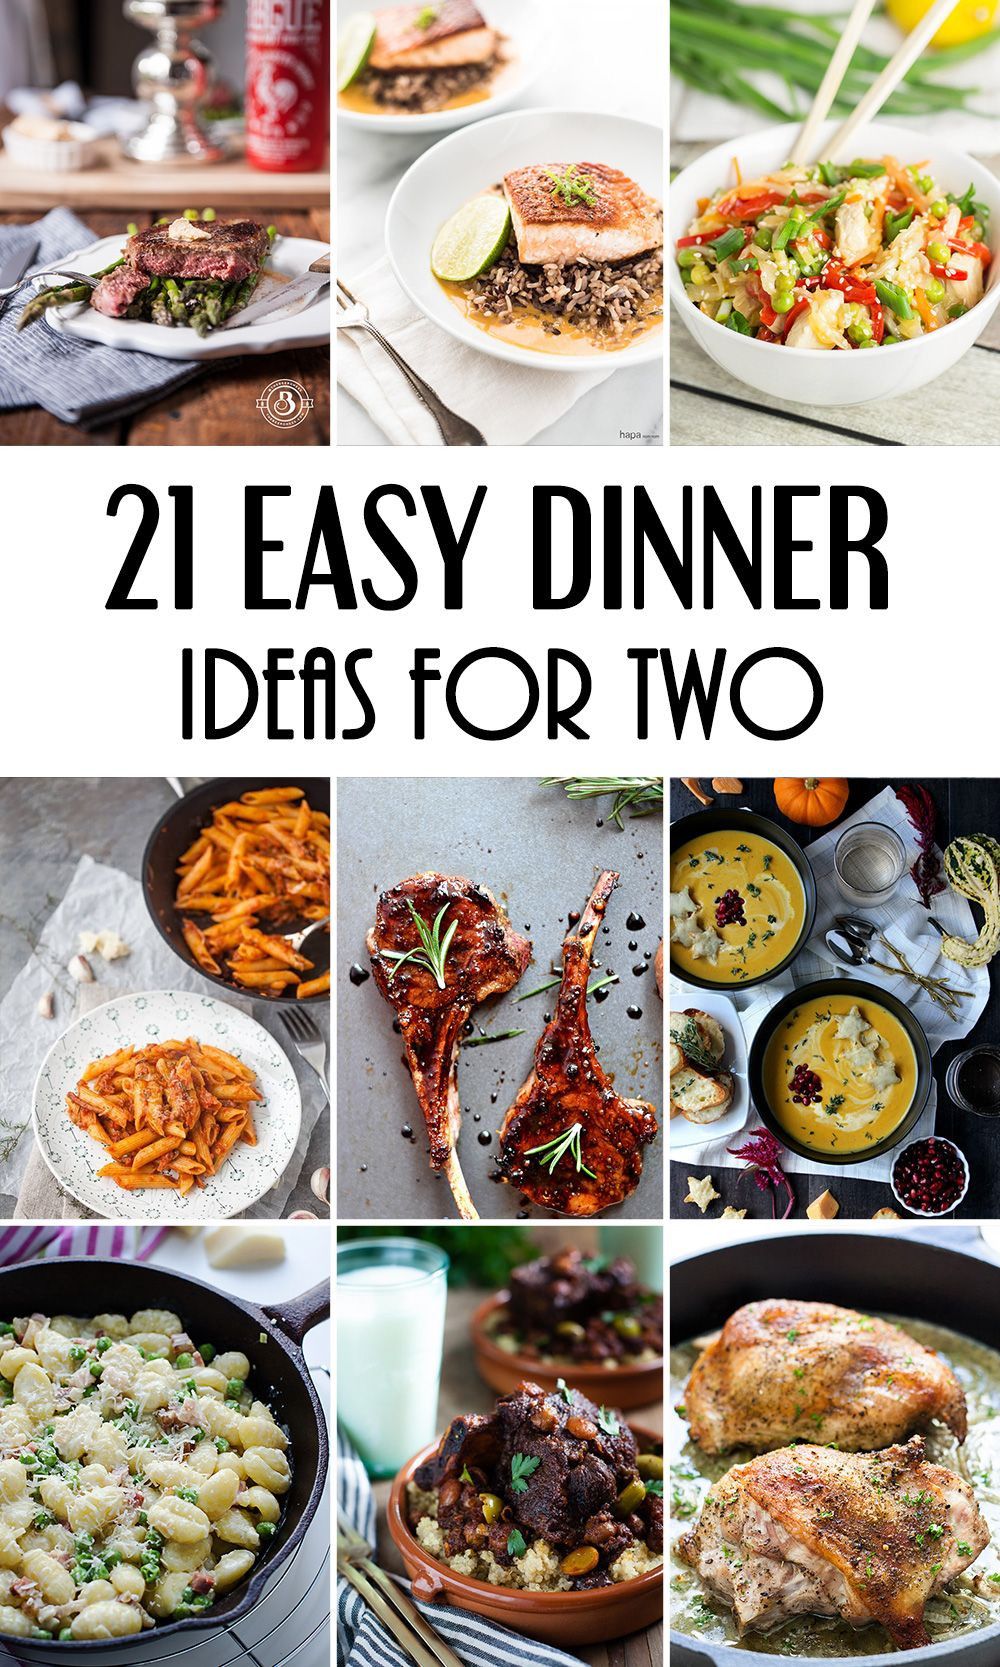 Easy Dinner Recipes For Two Healthy
 21 Easy Dinner Ideas For Two That Will Impress Your Loved